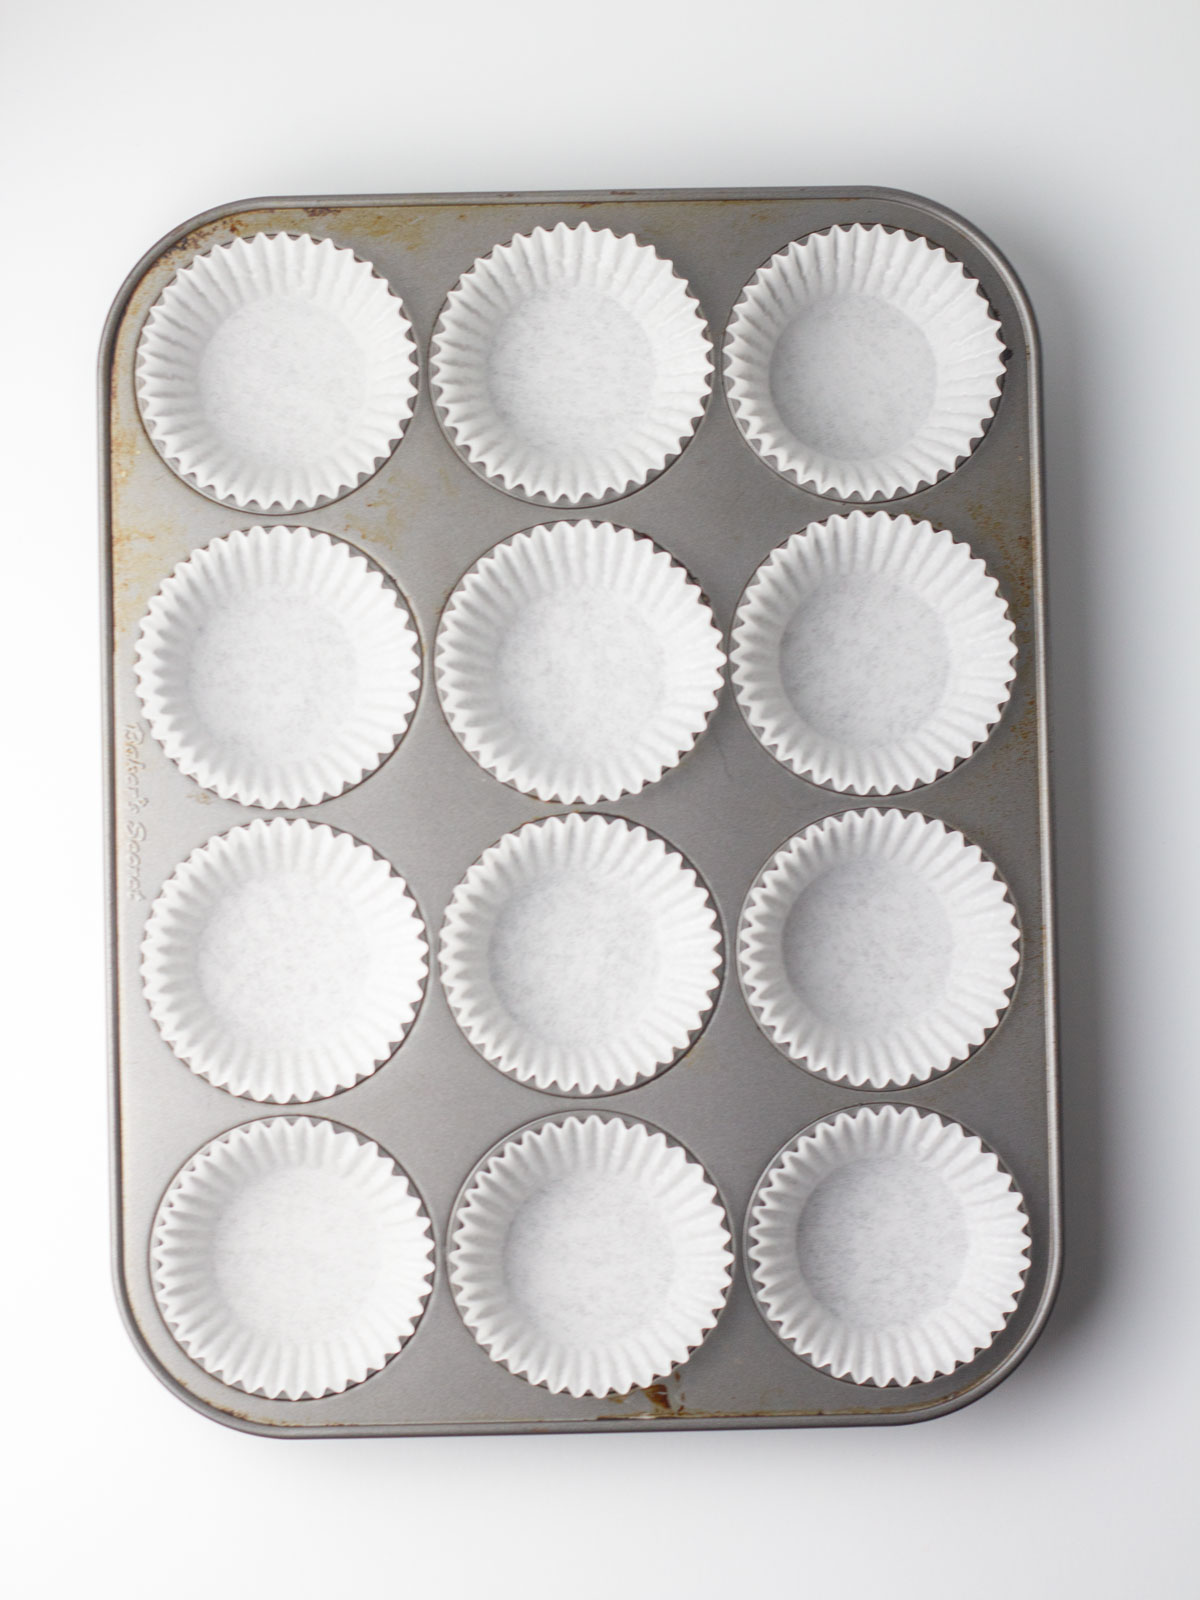 A 12 cup muffin tin lined with white paper liners.